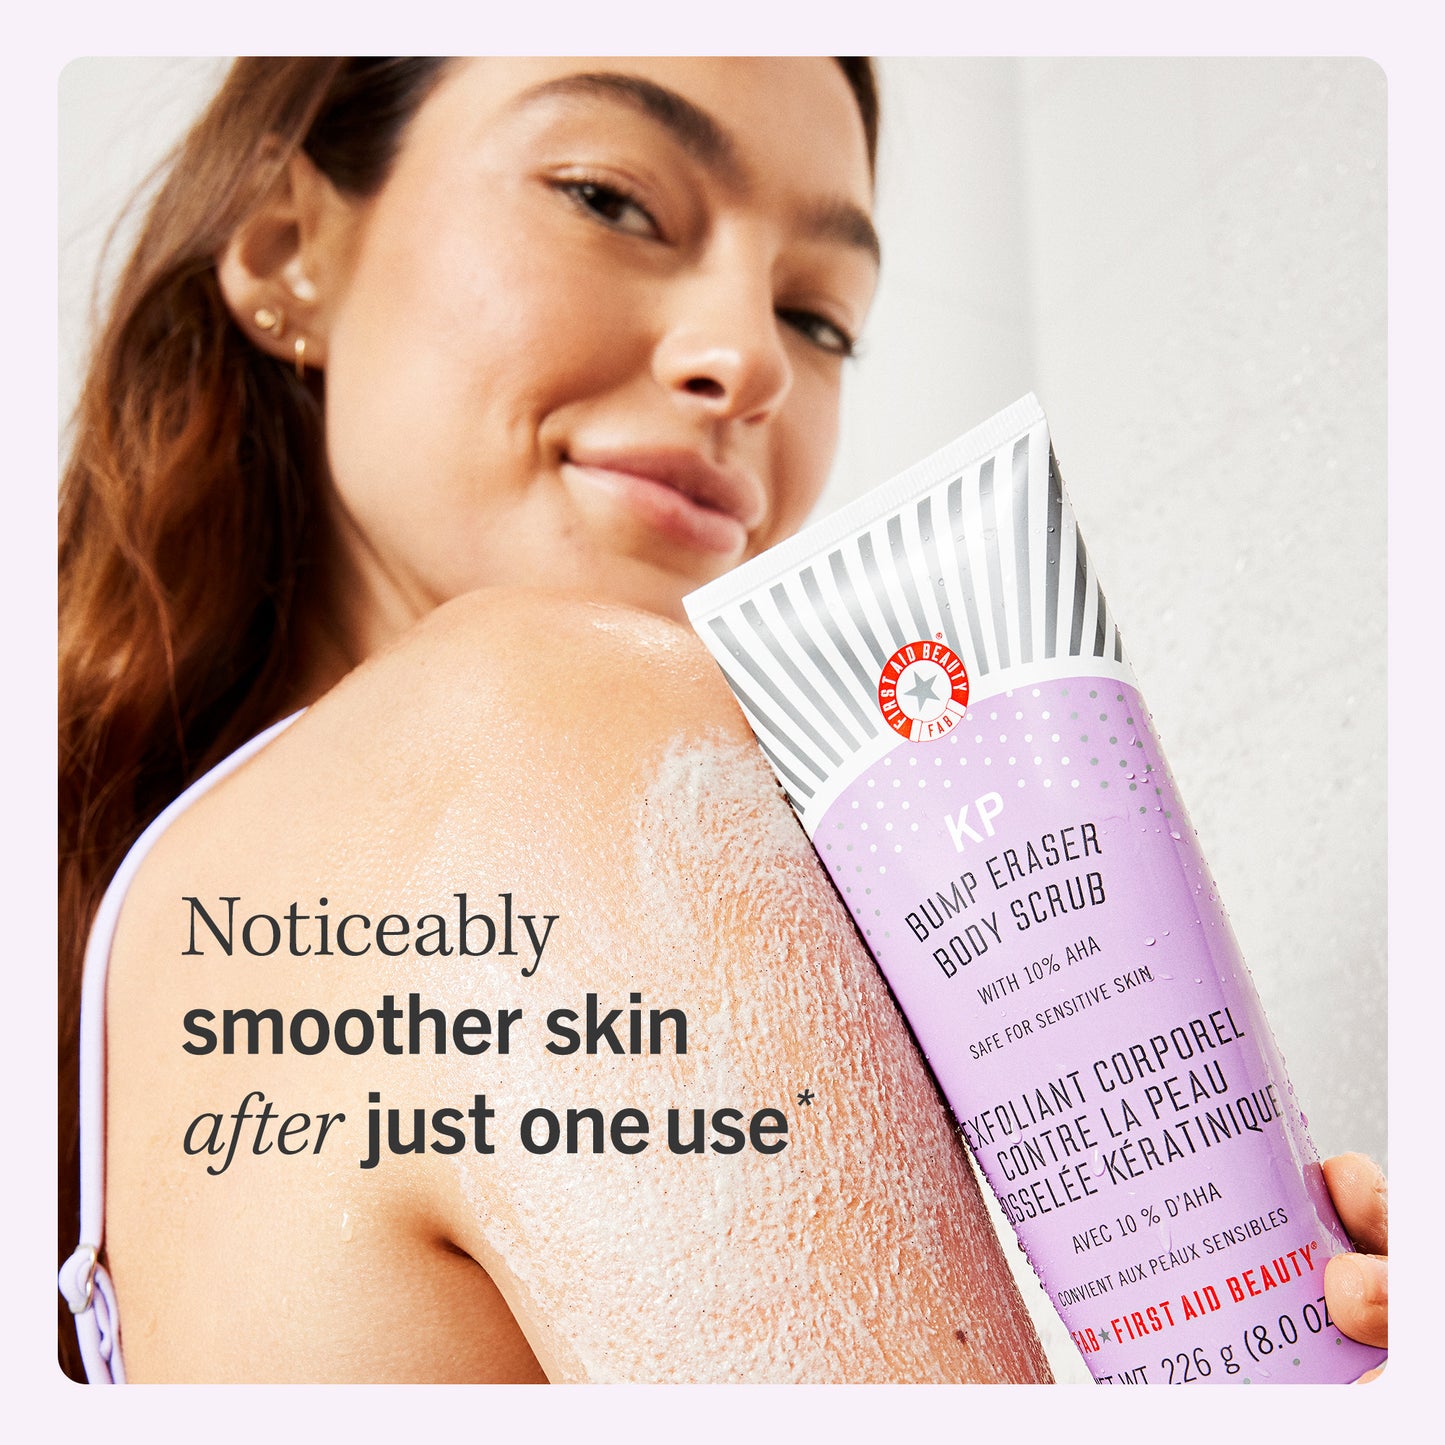 Model with KP Bump Eraser Body Scrub.  Noticeably smoother skin after just one use.